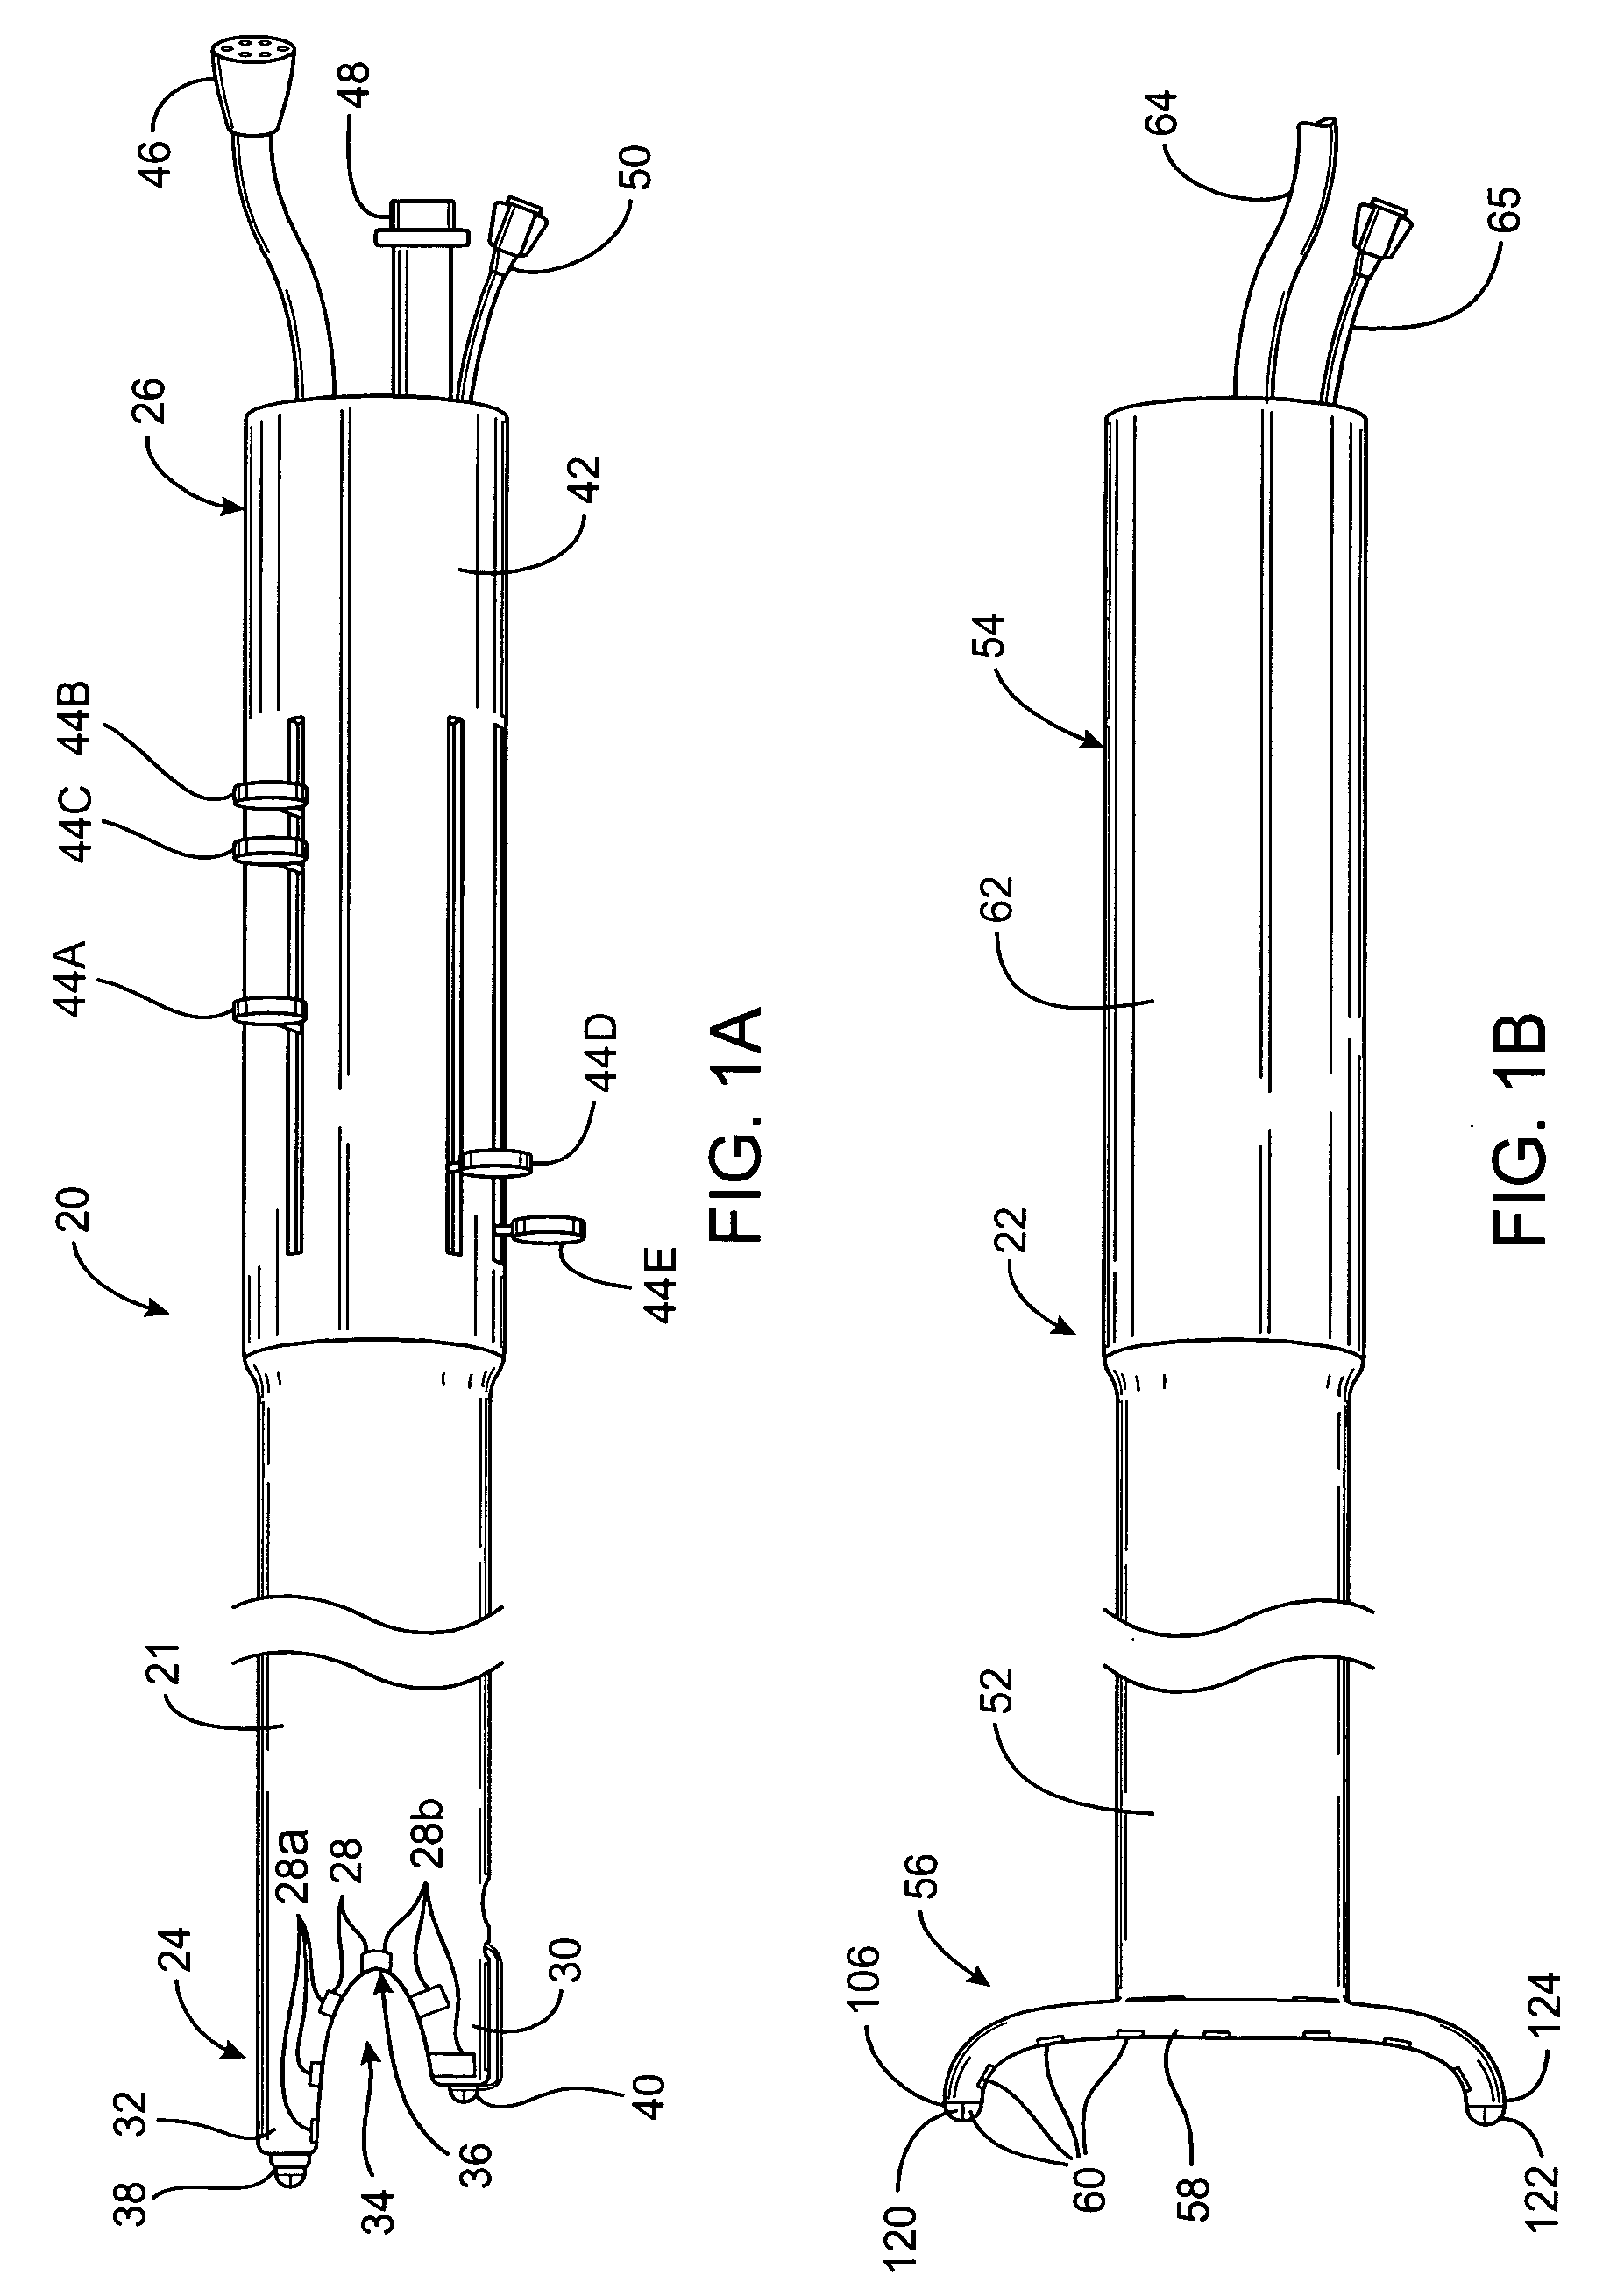 Apparatus and method for ablating tissue